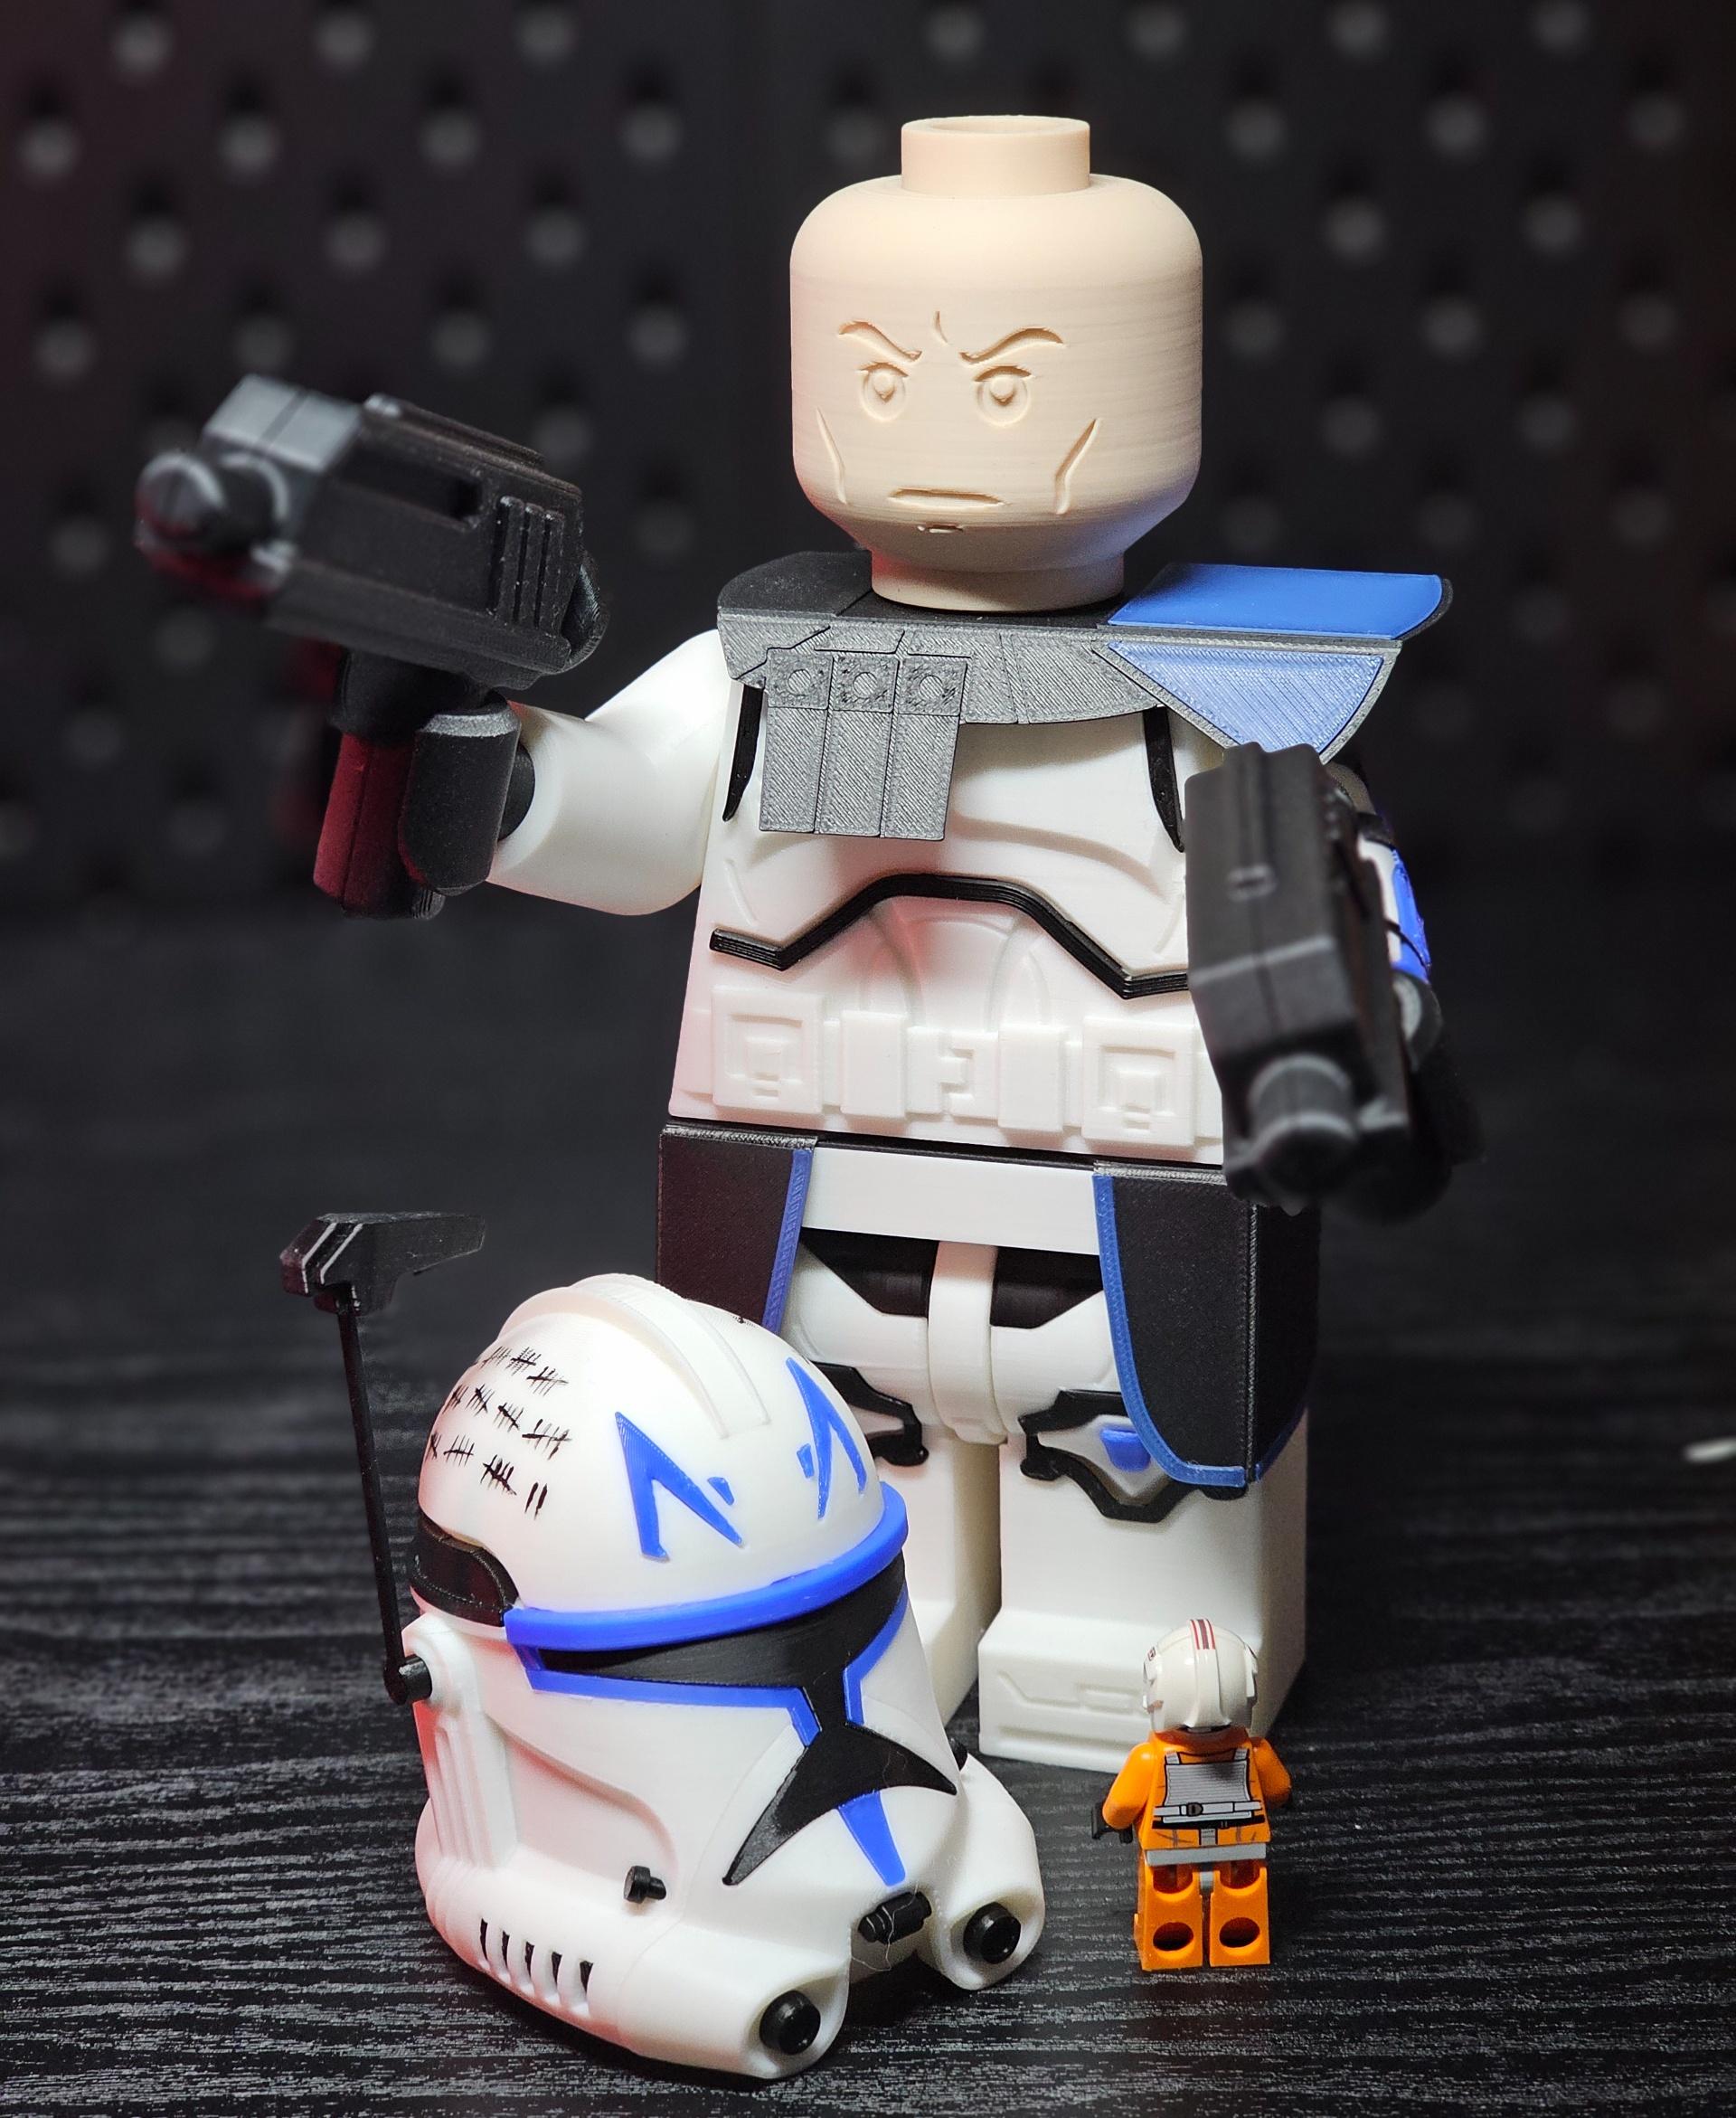 Captain Rex (6:1 LEGO-inspired brick figure, NO MMU/AMS, NO supports, NO glue) - "In my book, experience outranks everything." - 3d model